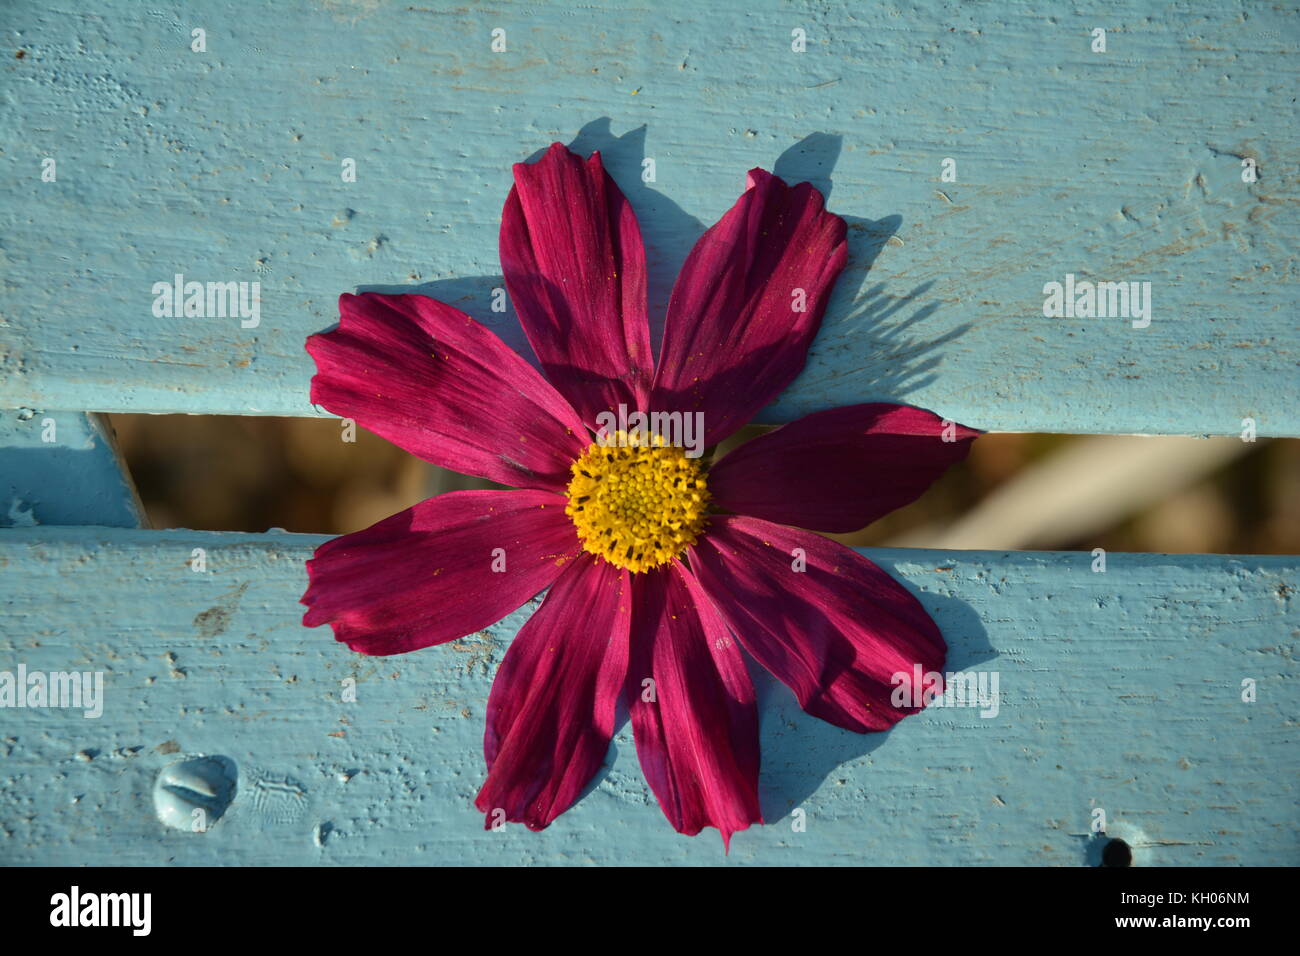 Cosmos flower head on blue table Stock Photo